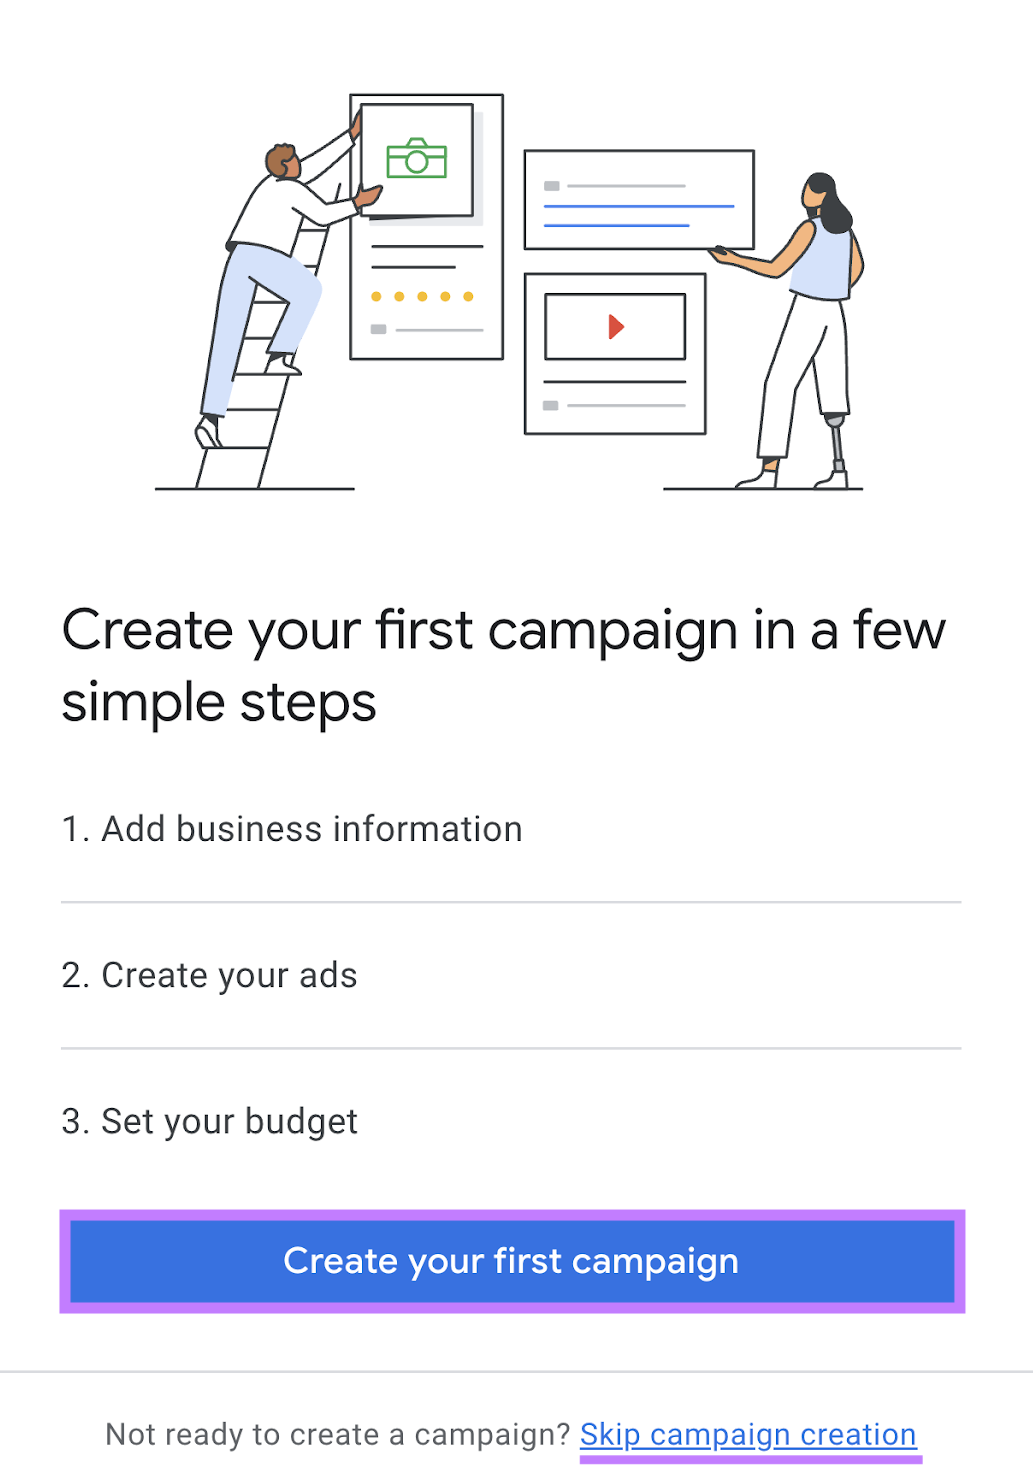 "Create your first campaign in a few simple steps" screen